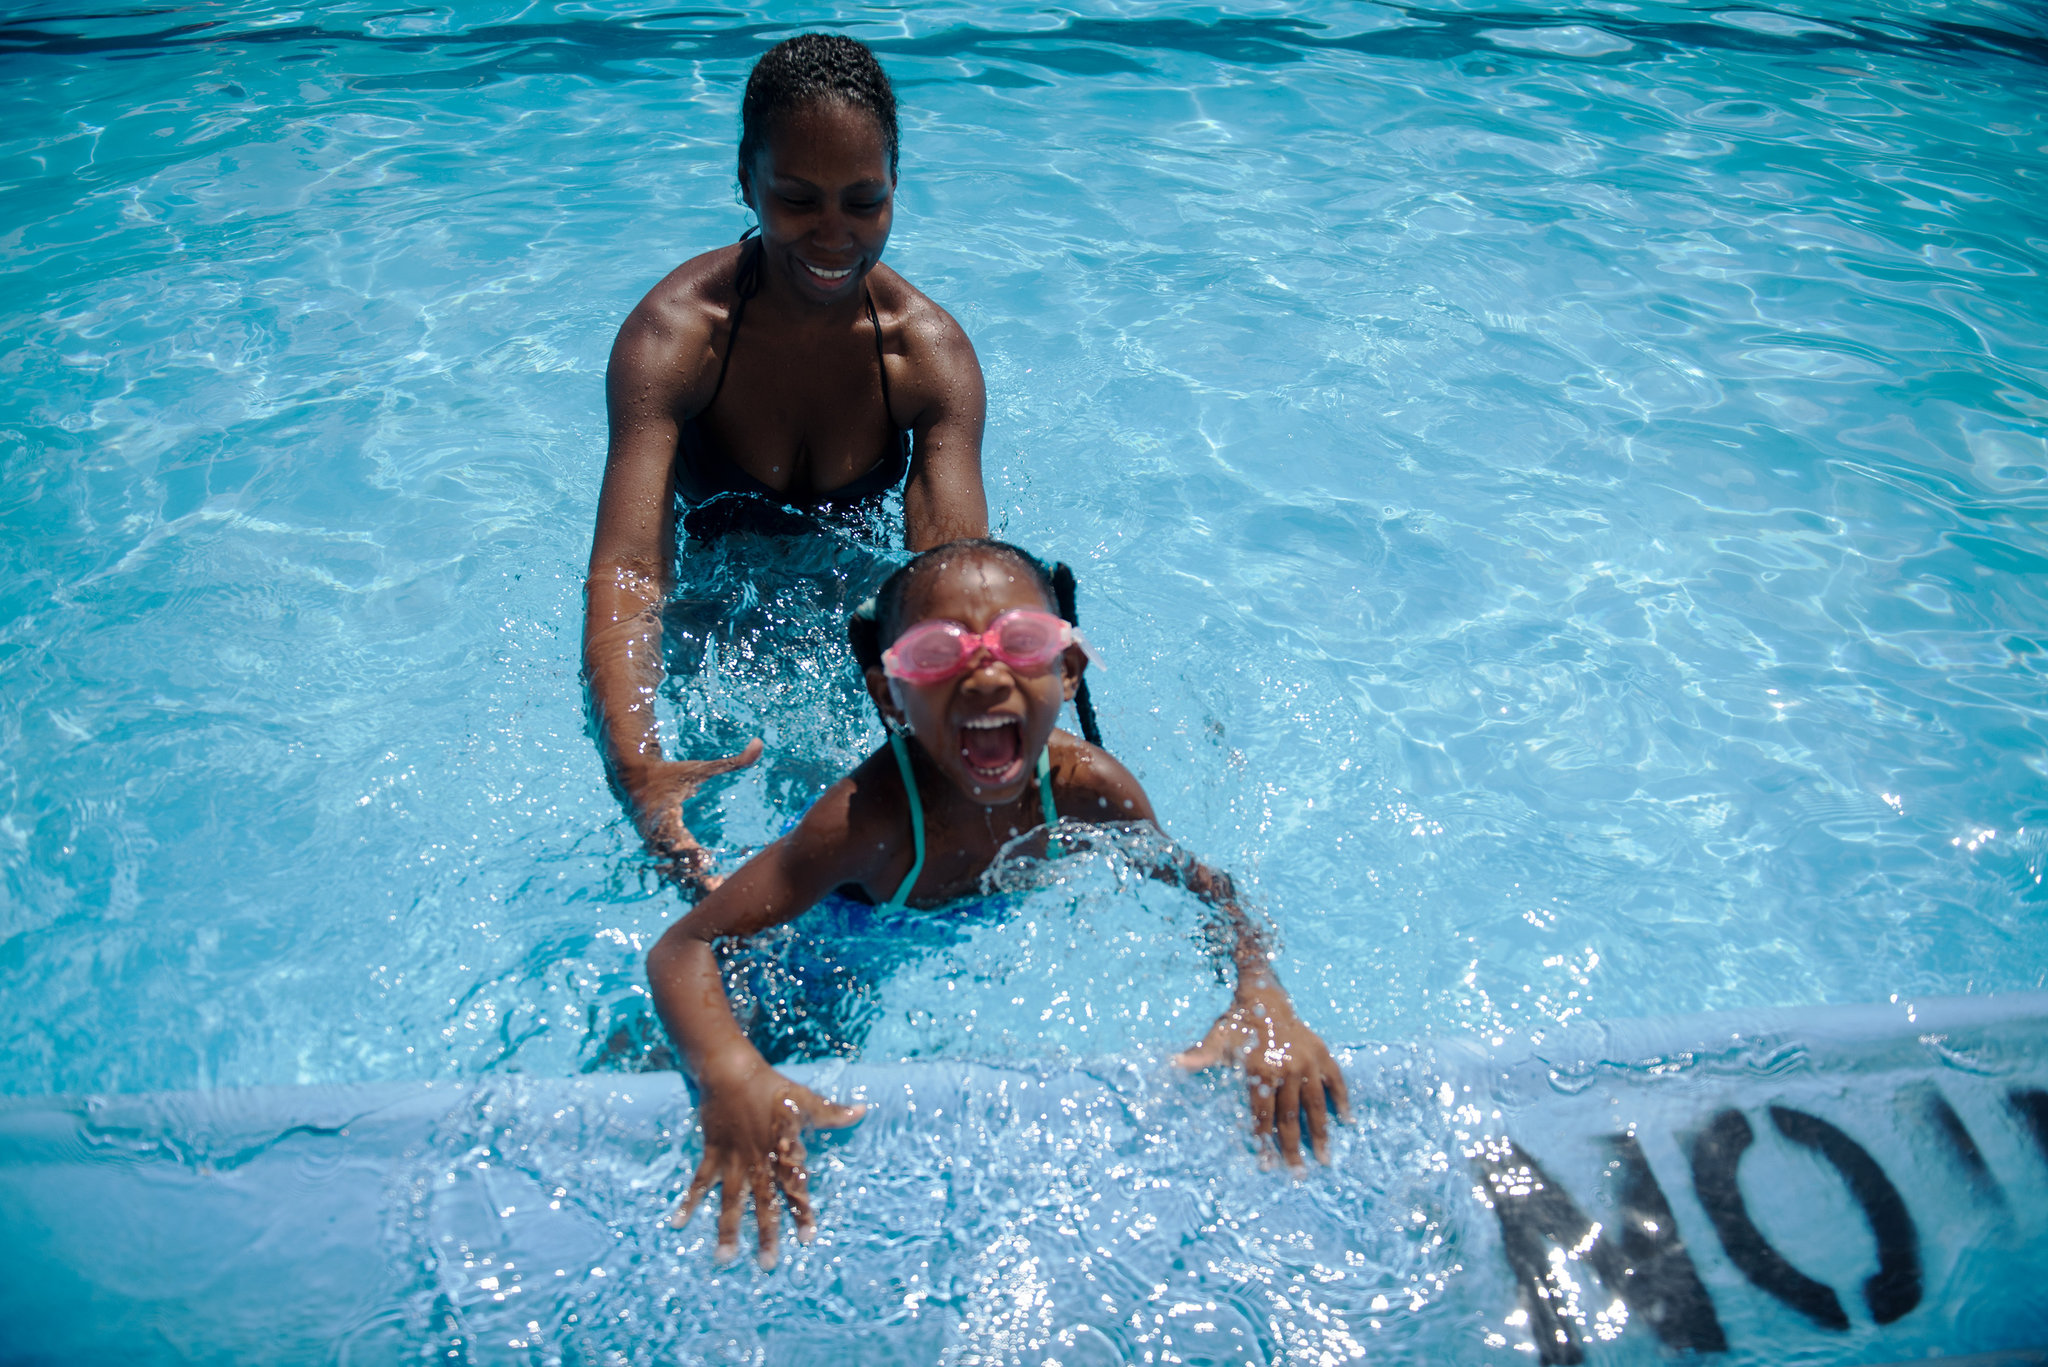 Empowering Black Children in Swimming: The Woman Leading Change